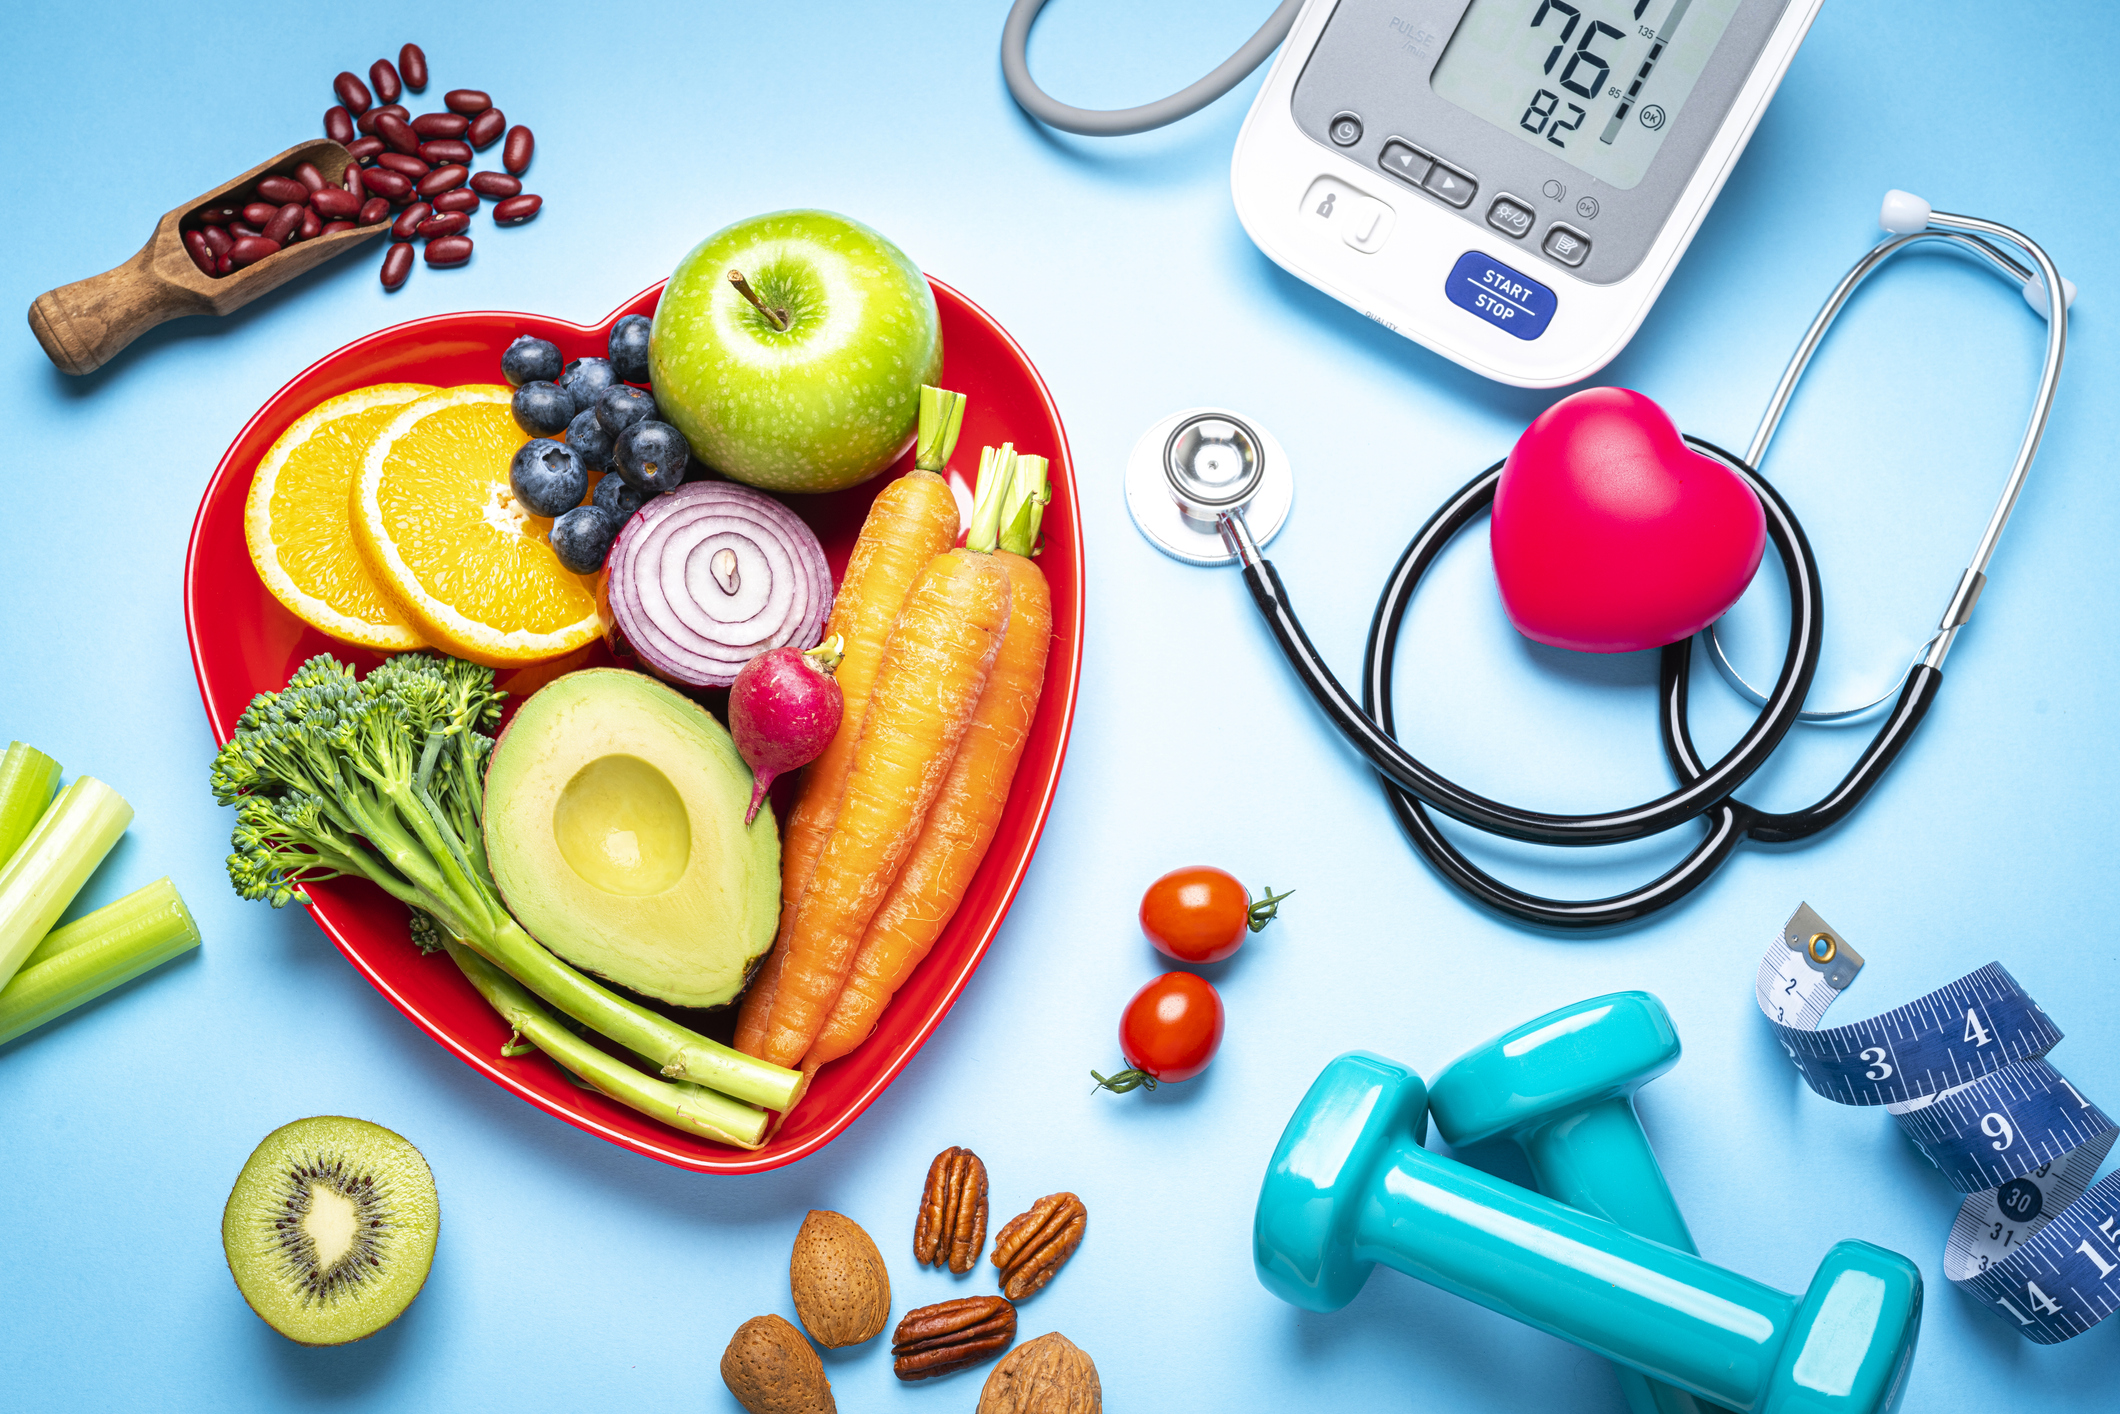 Good nutrition is the centerpiece of a program to help patients continue recovery